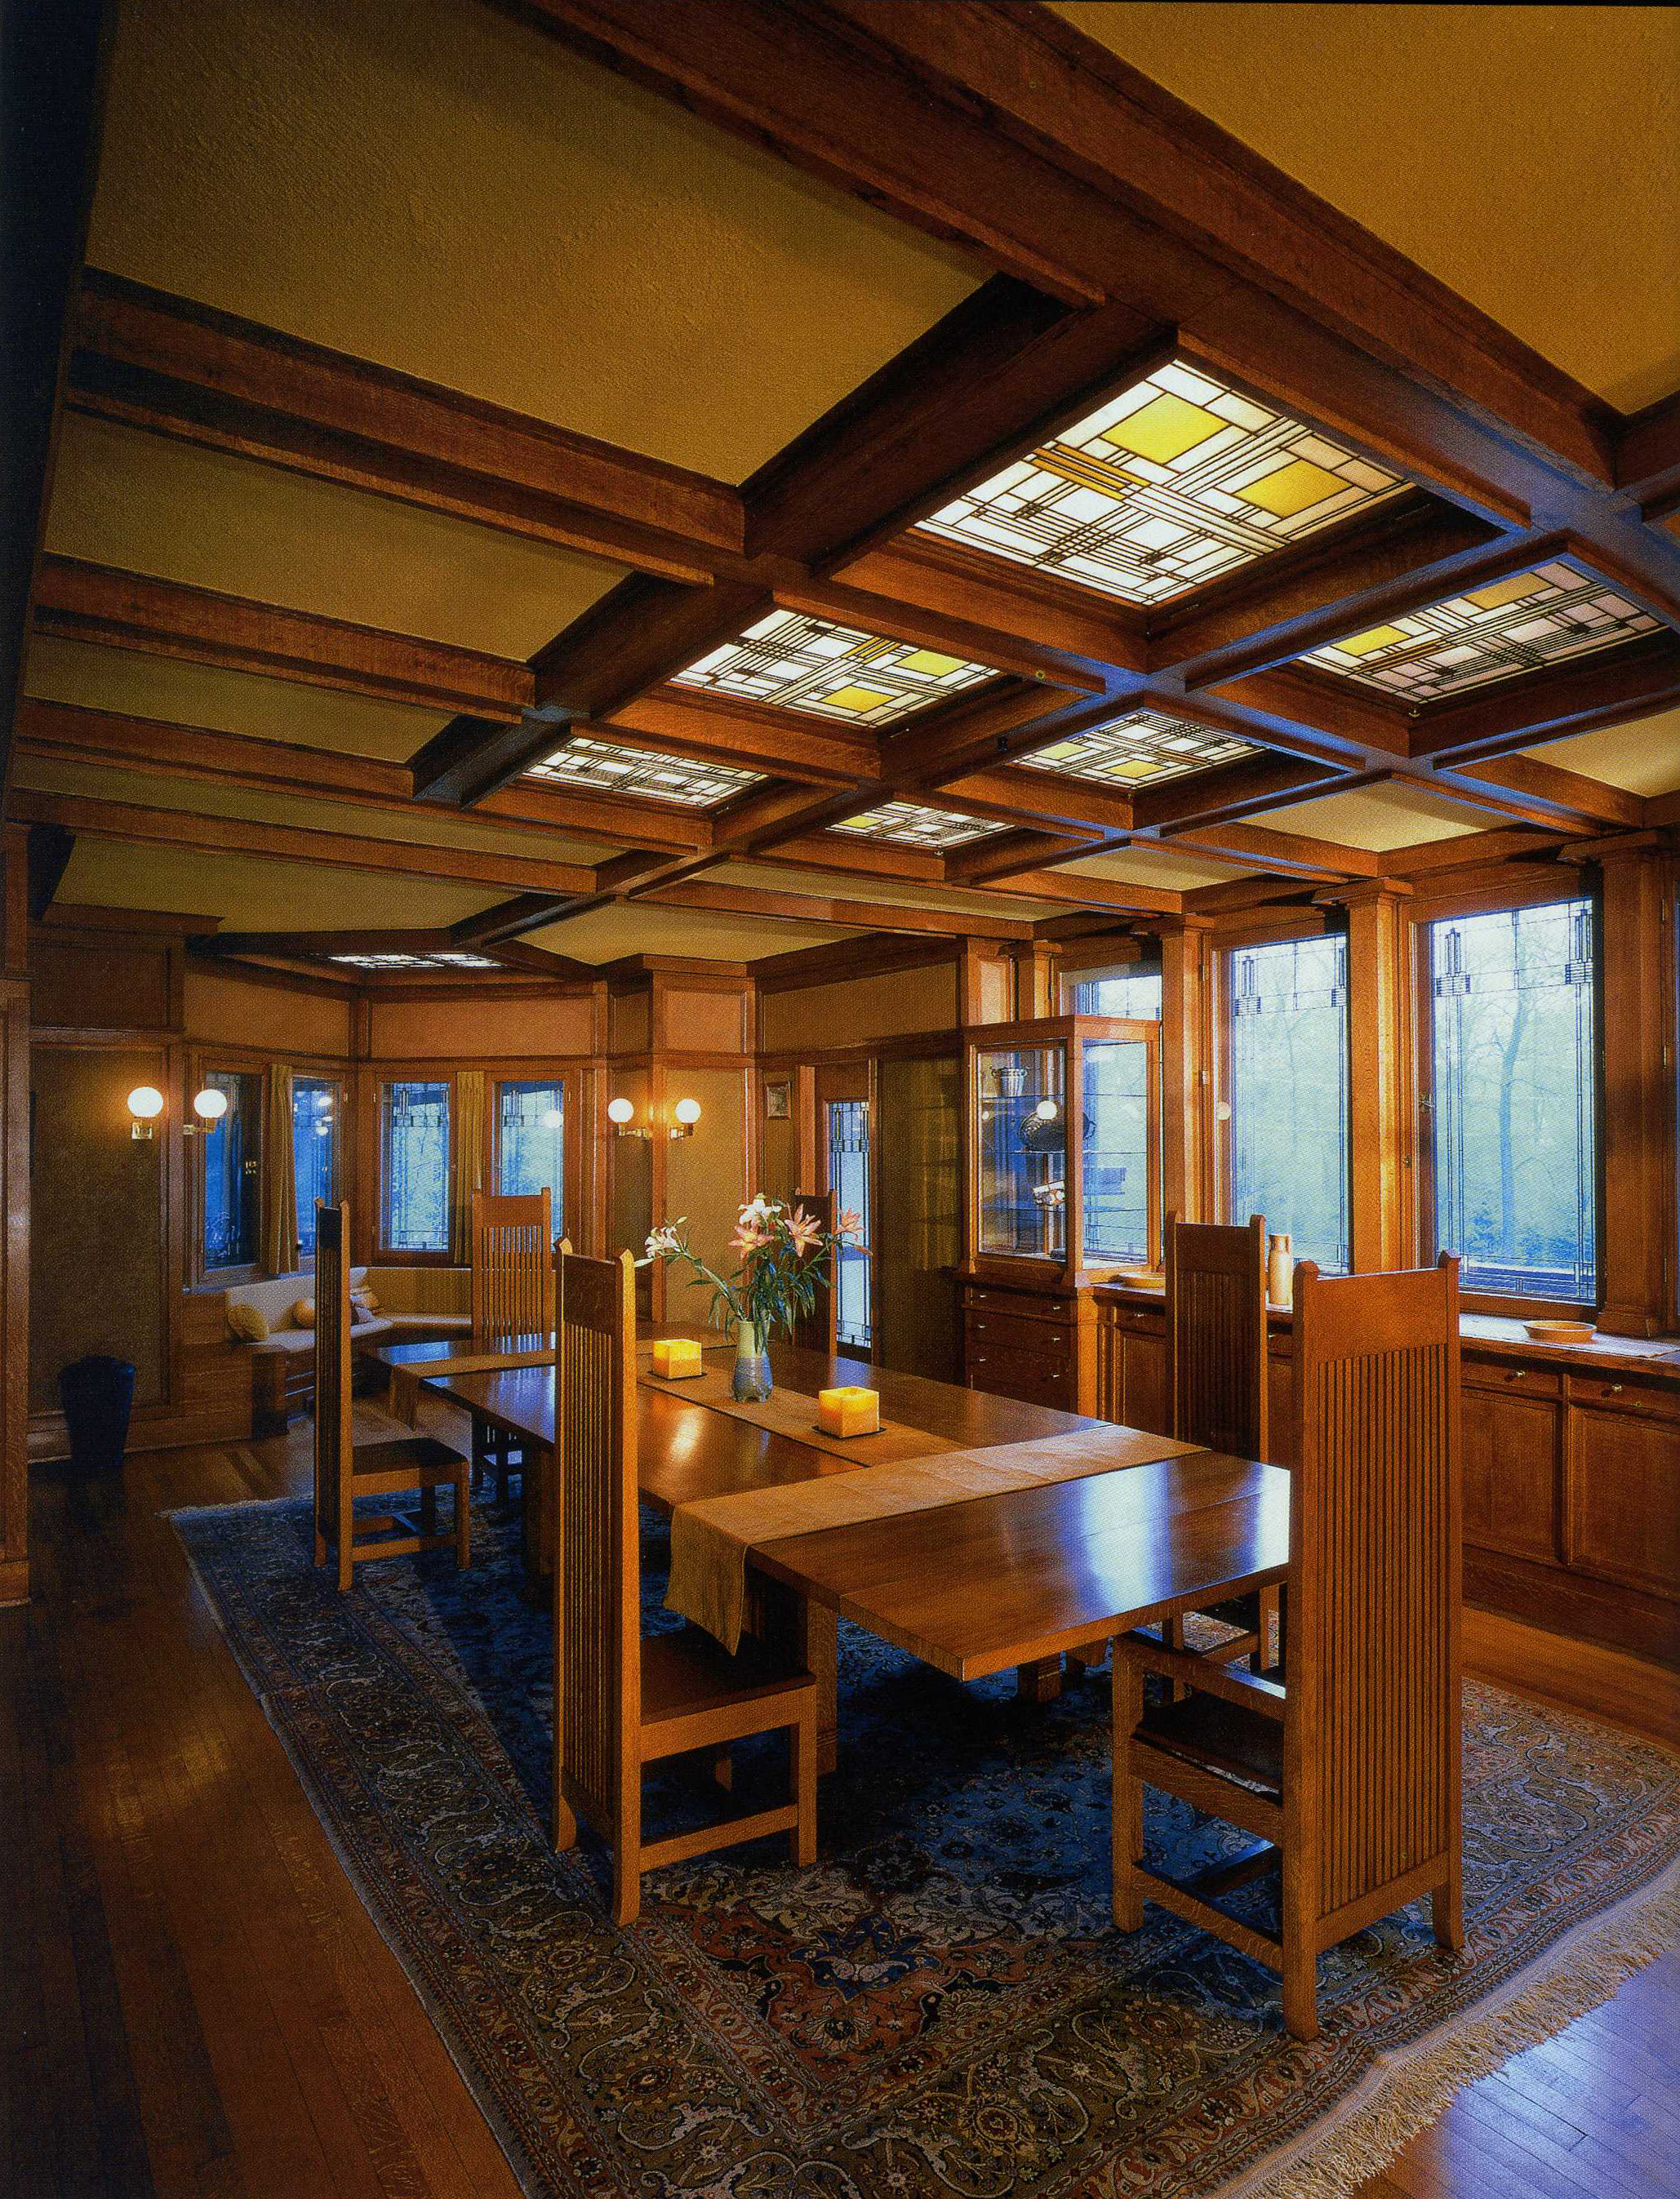 29+ Prairie House Frank Lloyd Wright Interior of wingspread, johnson house in racine wisconsin, designed by